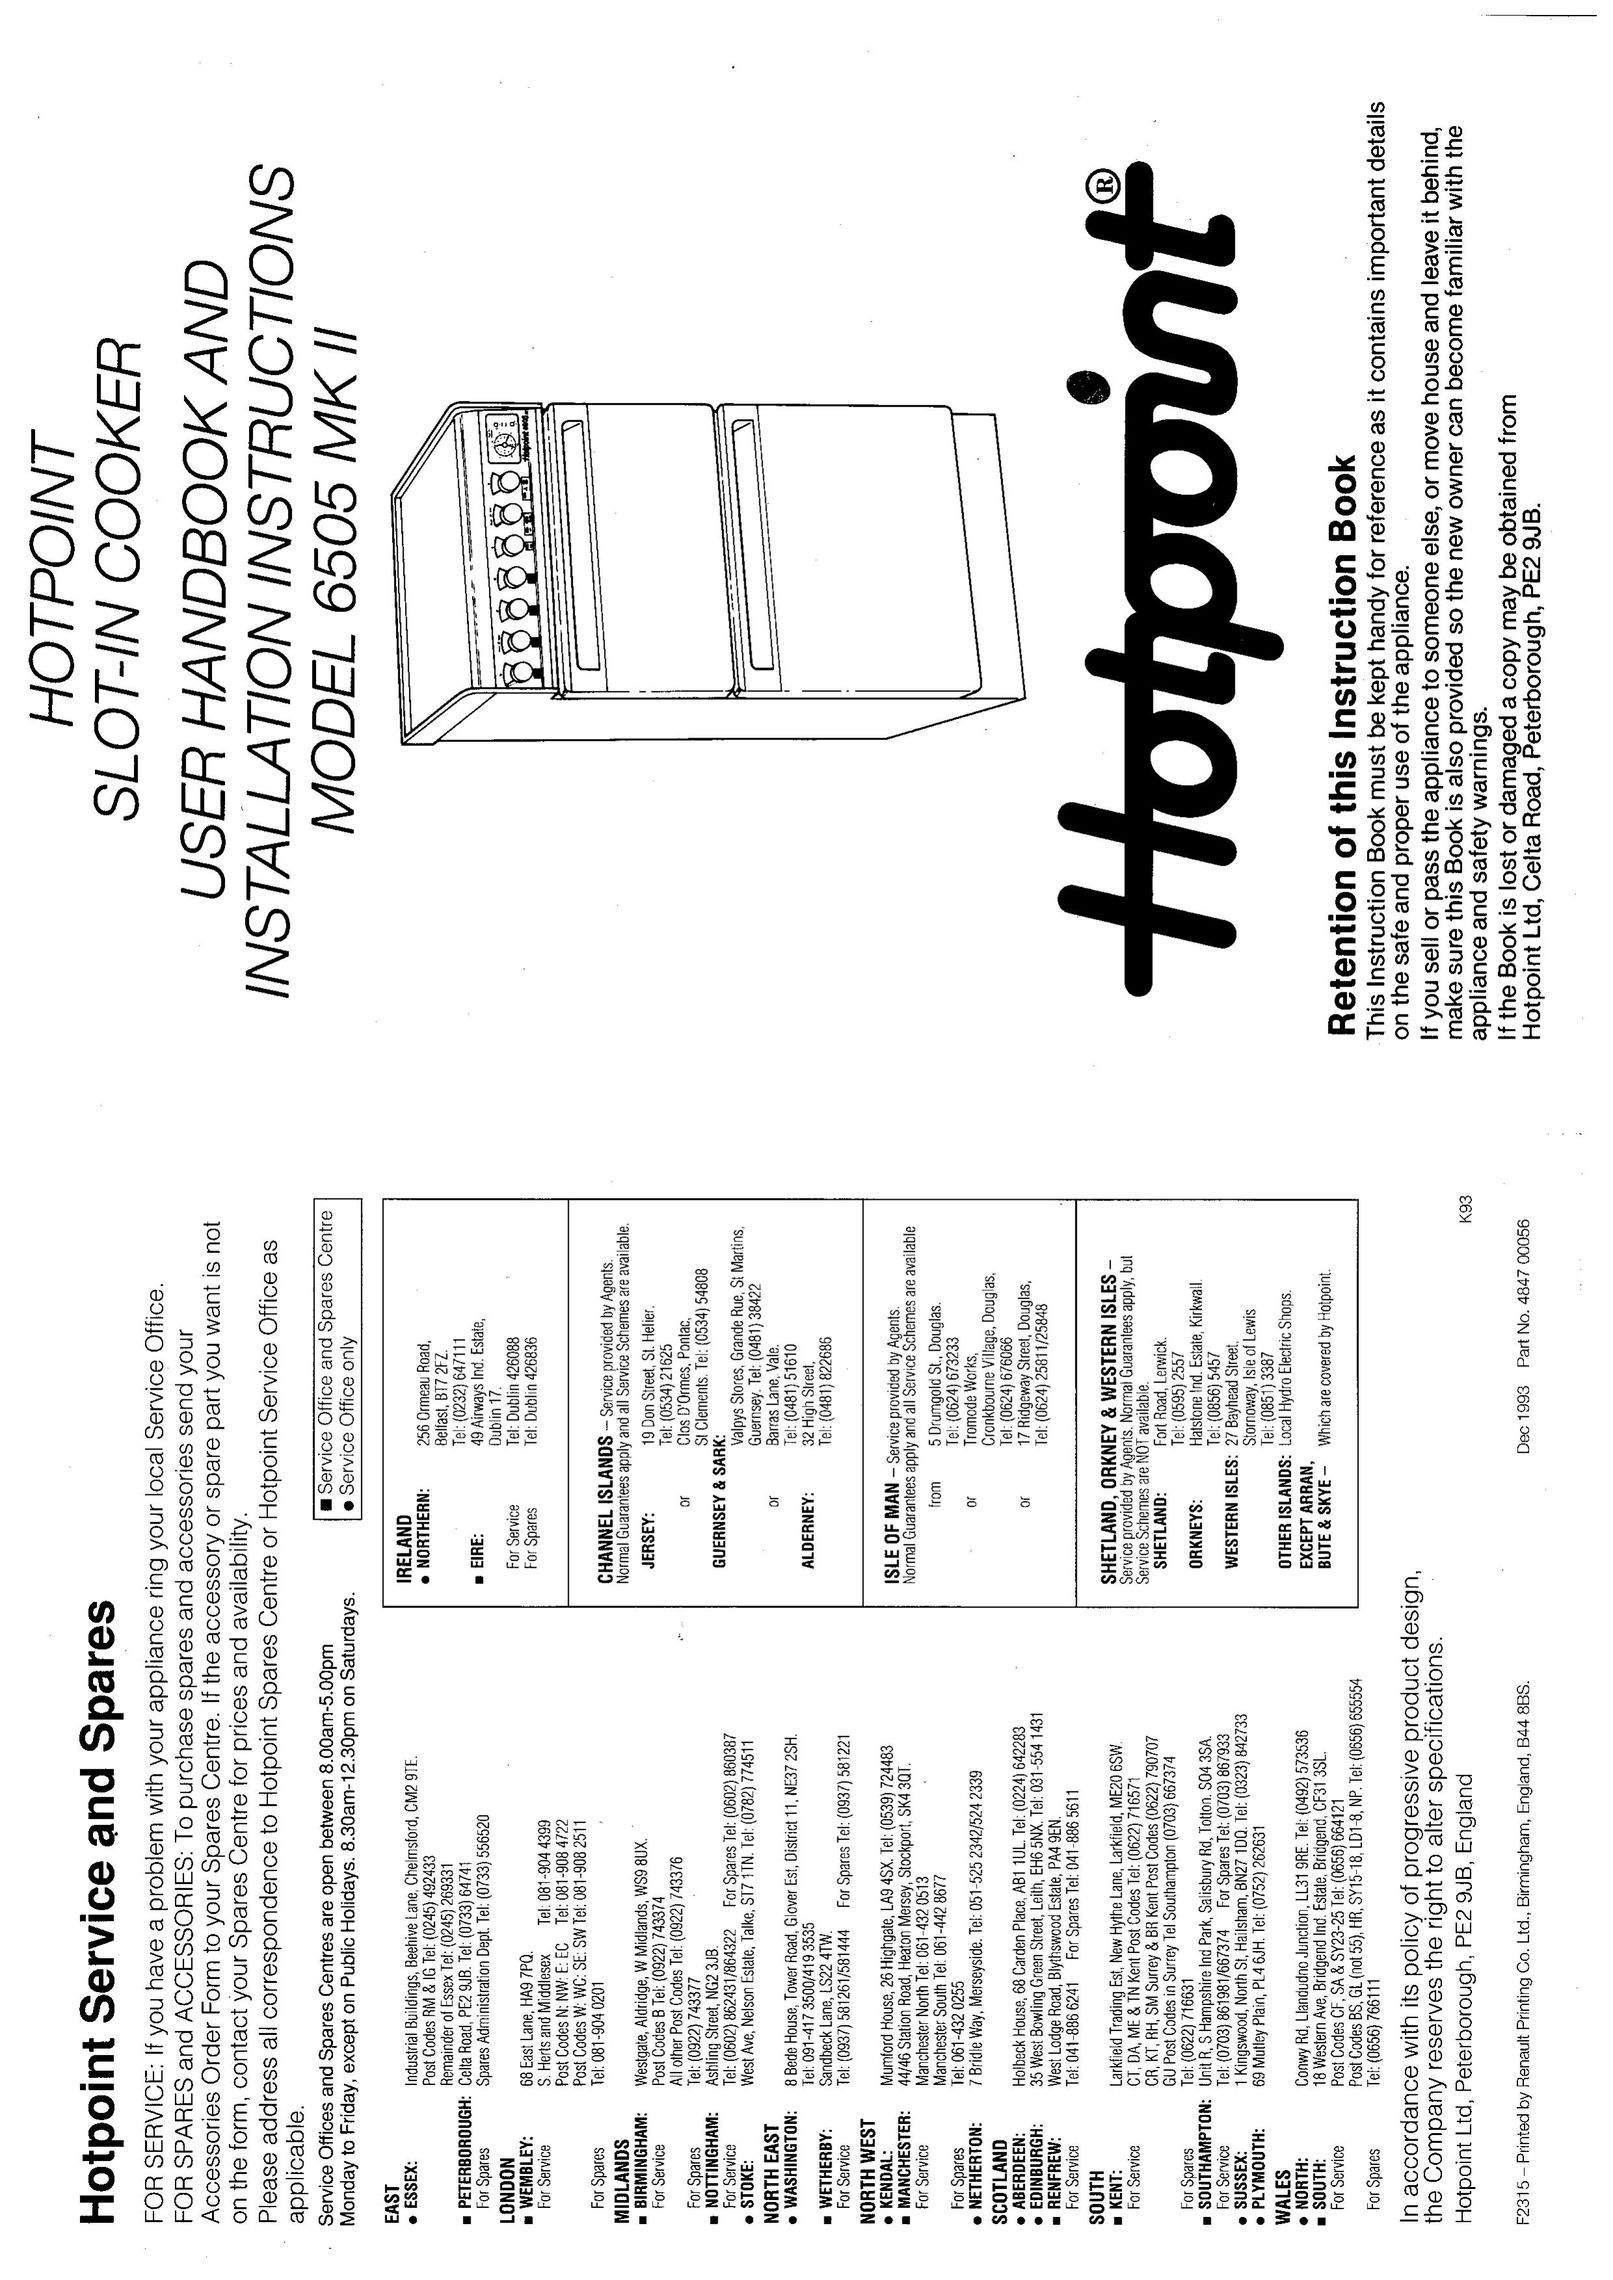 Hotpoint 6505MKII Cooktop User Manual